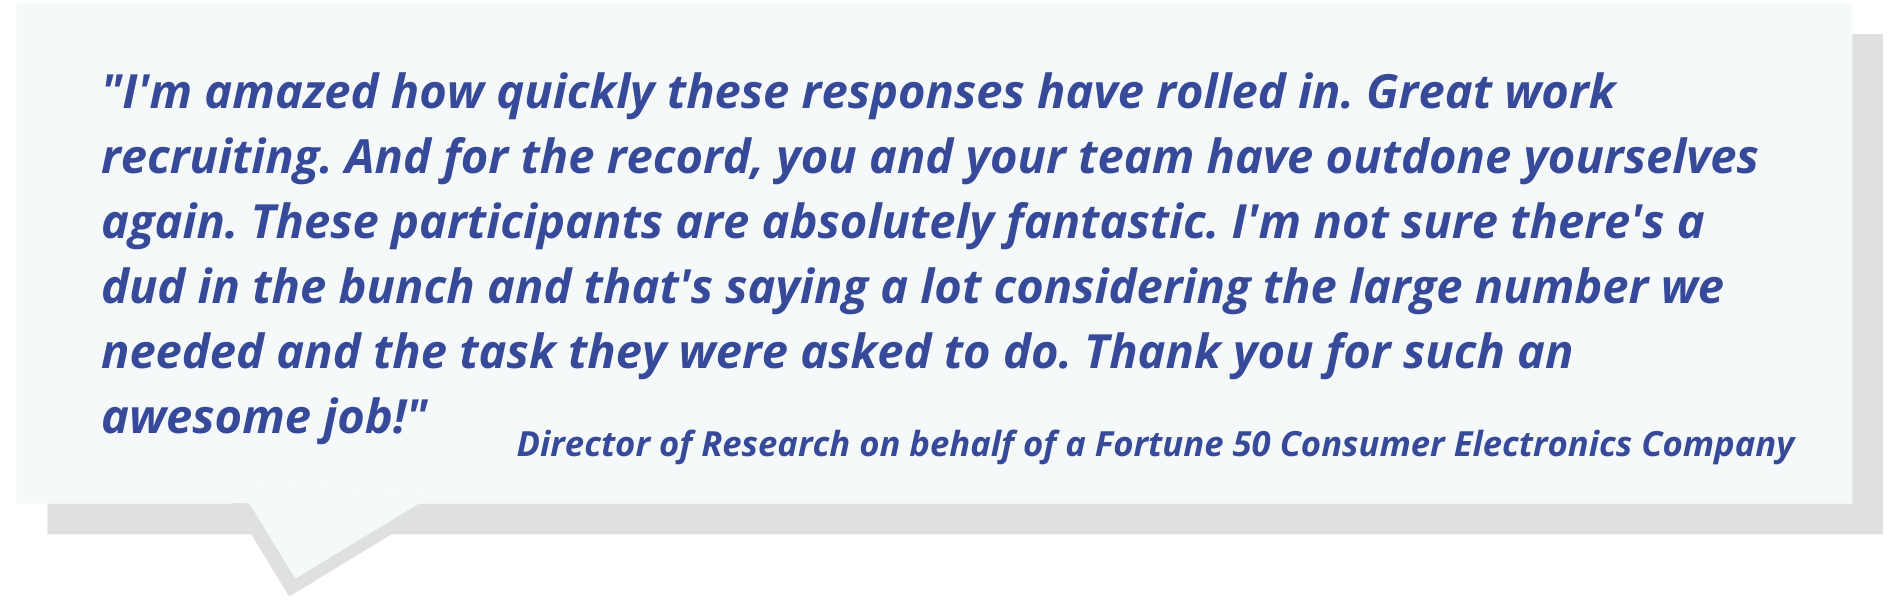 "I'm amazed how quickly these responses have rolled in. Great work recruiting. And for the record, you and your team have outdone yourselves again. These participants are absolutely fantastic. I'm not sure there's a dud in the bunch and that's saying a lot considering the large number we needed and the task they were asked to do. Thank you for such an awesome job!"